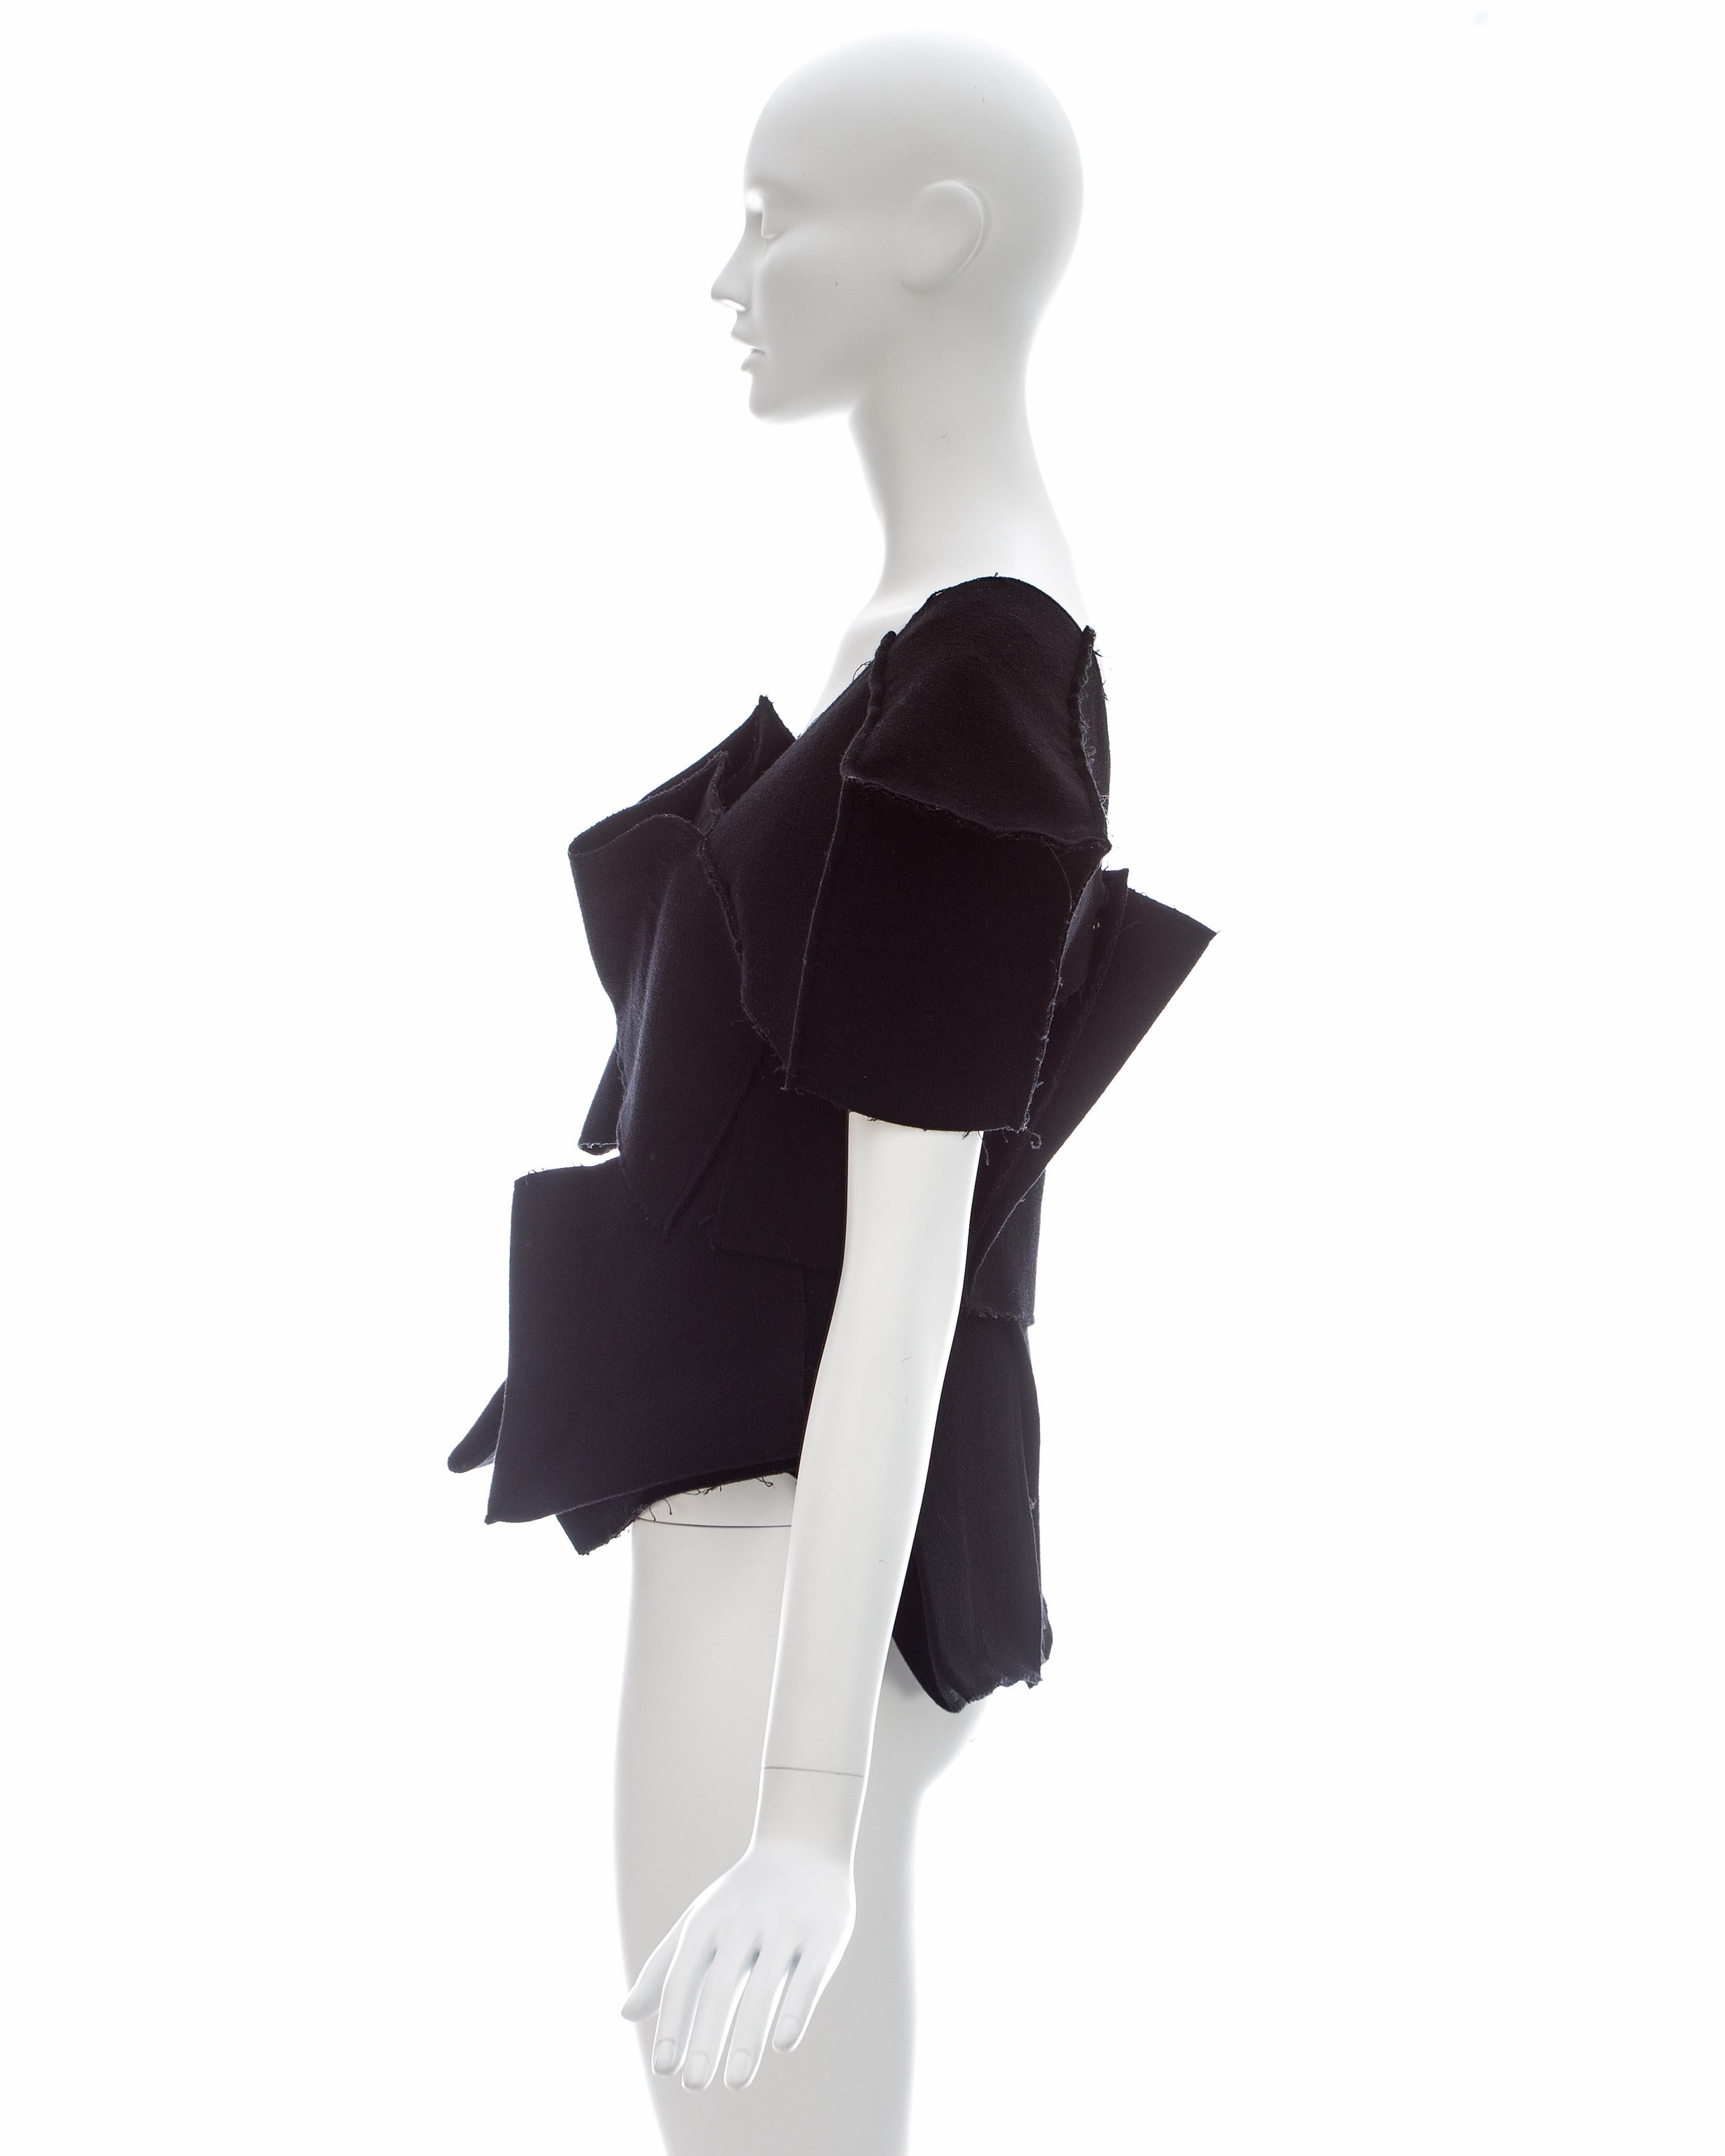 Women's Yohji Yamamoto black wool top made with bellow pockets, fw 1990 For Sale